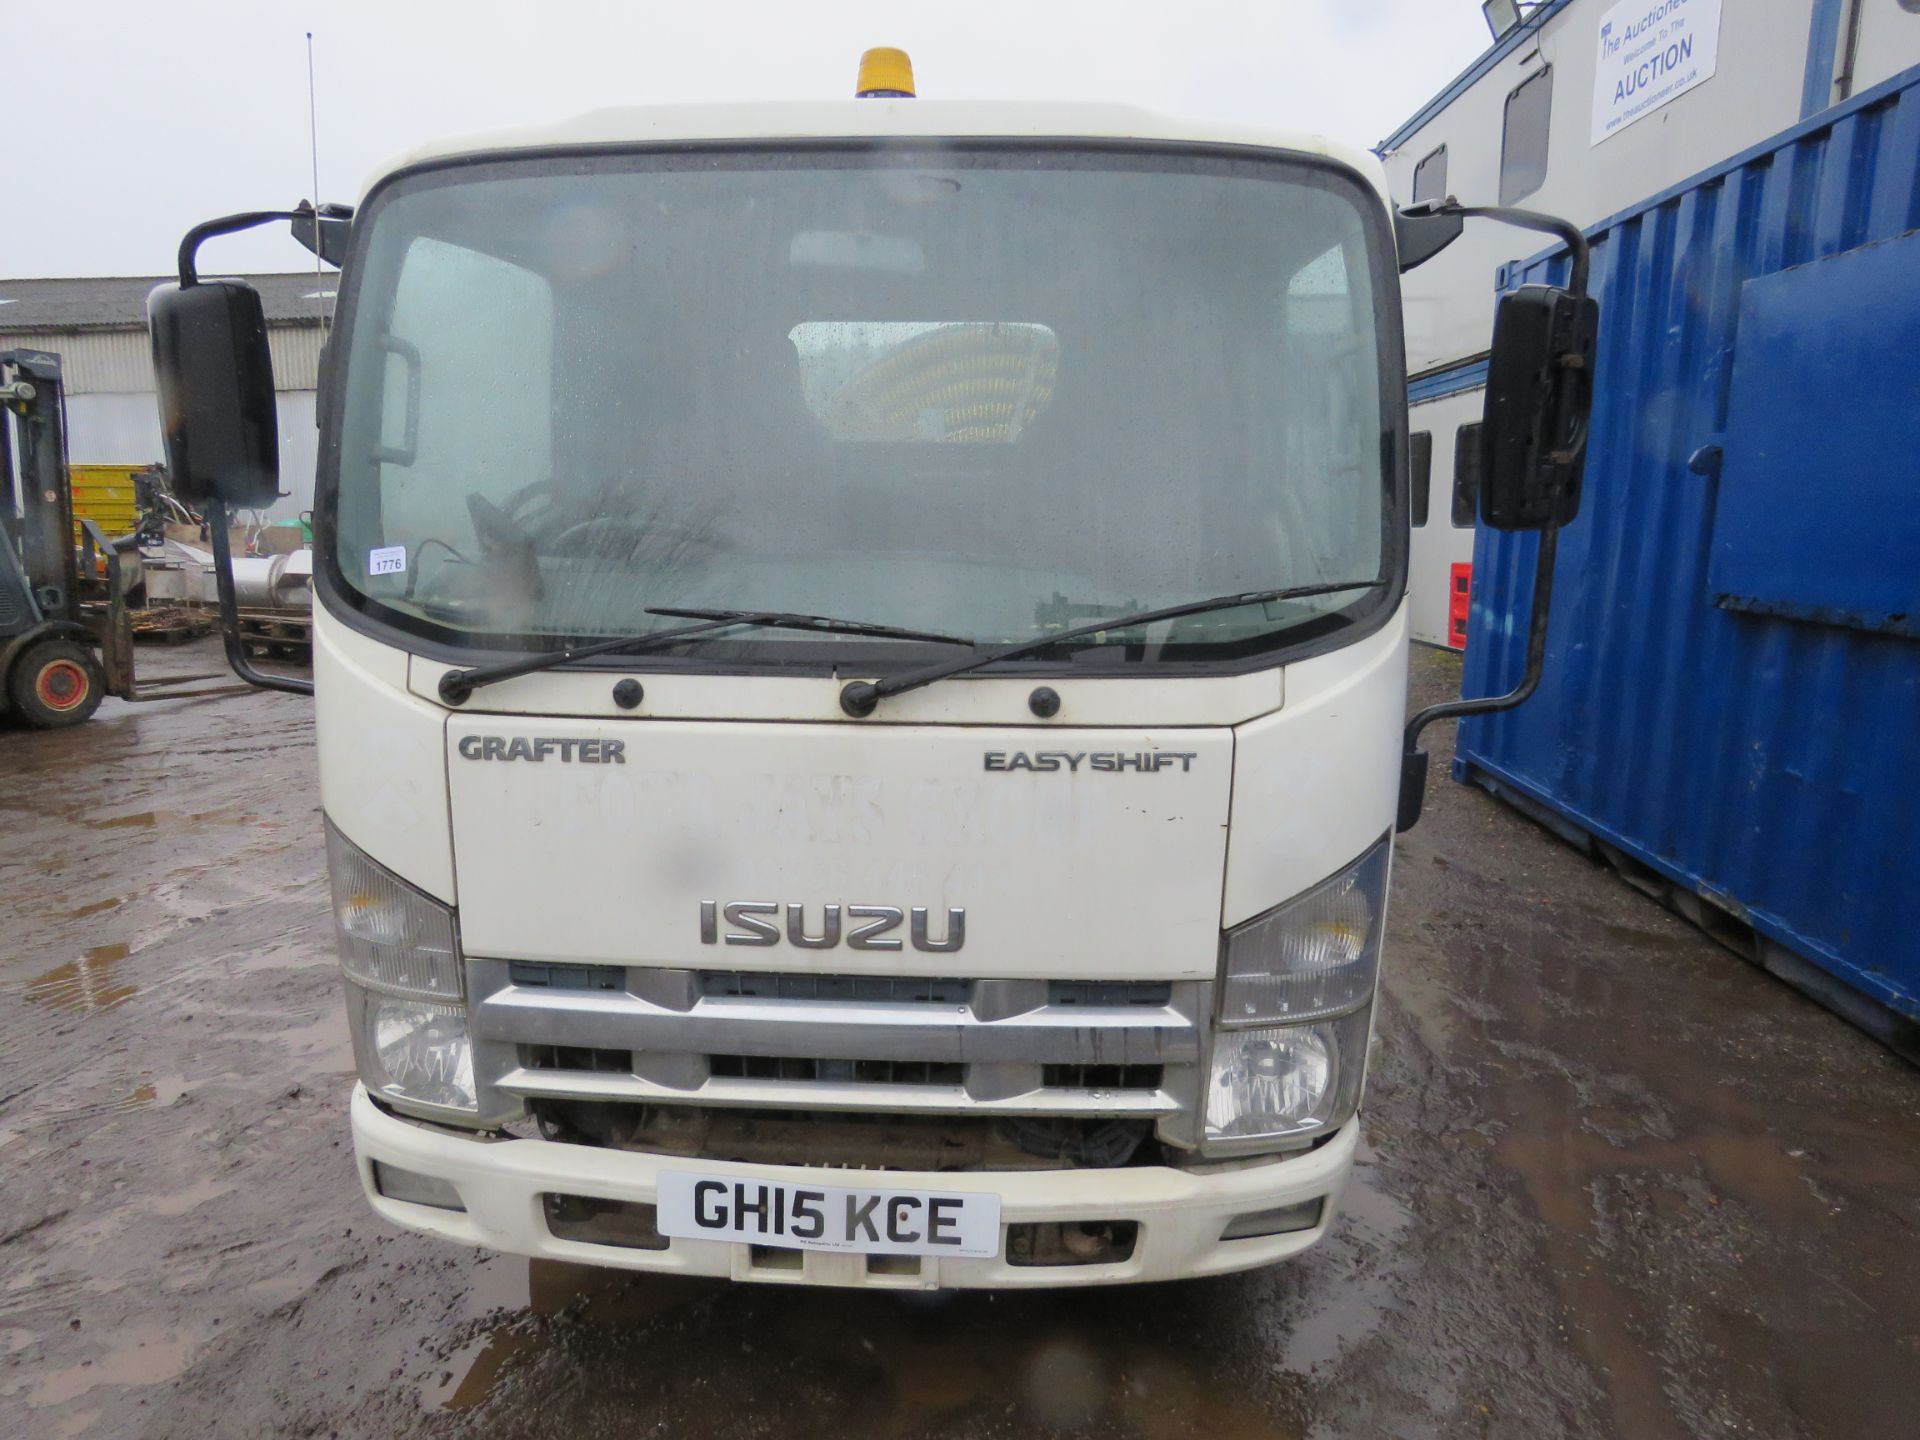 ISUZU N35.150 PORTABLE TOILET SERVICE VEHICLE TANKER TRUCK REG:GH15 KCE. 3500KG RATED CAPACITY. WITH - Image 2 of 10